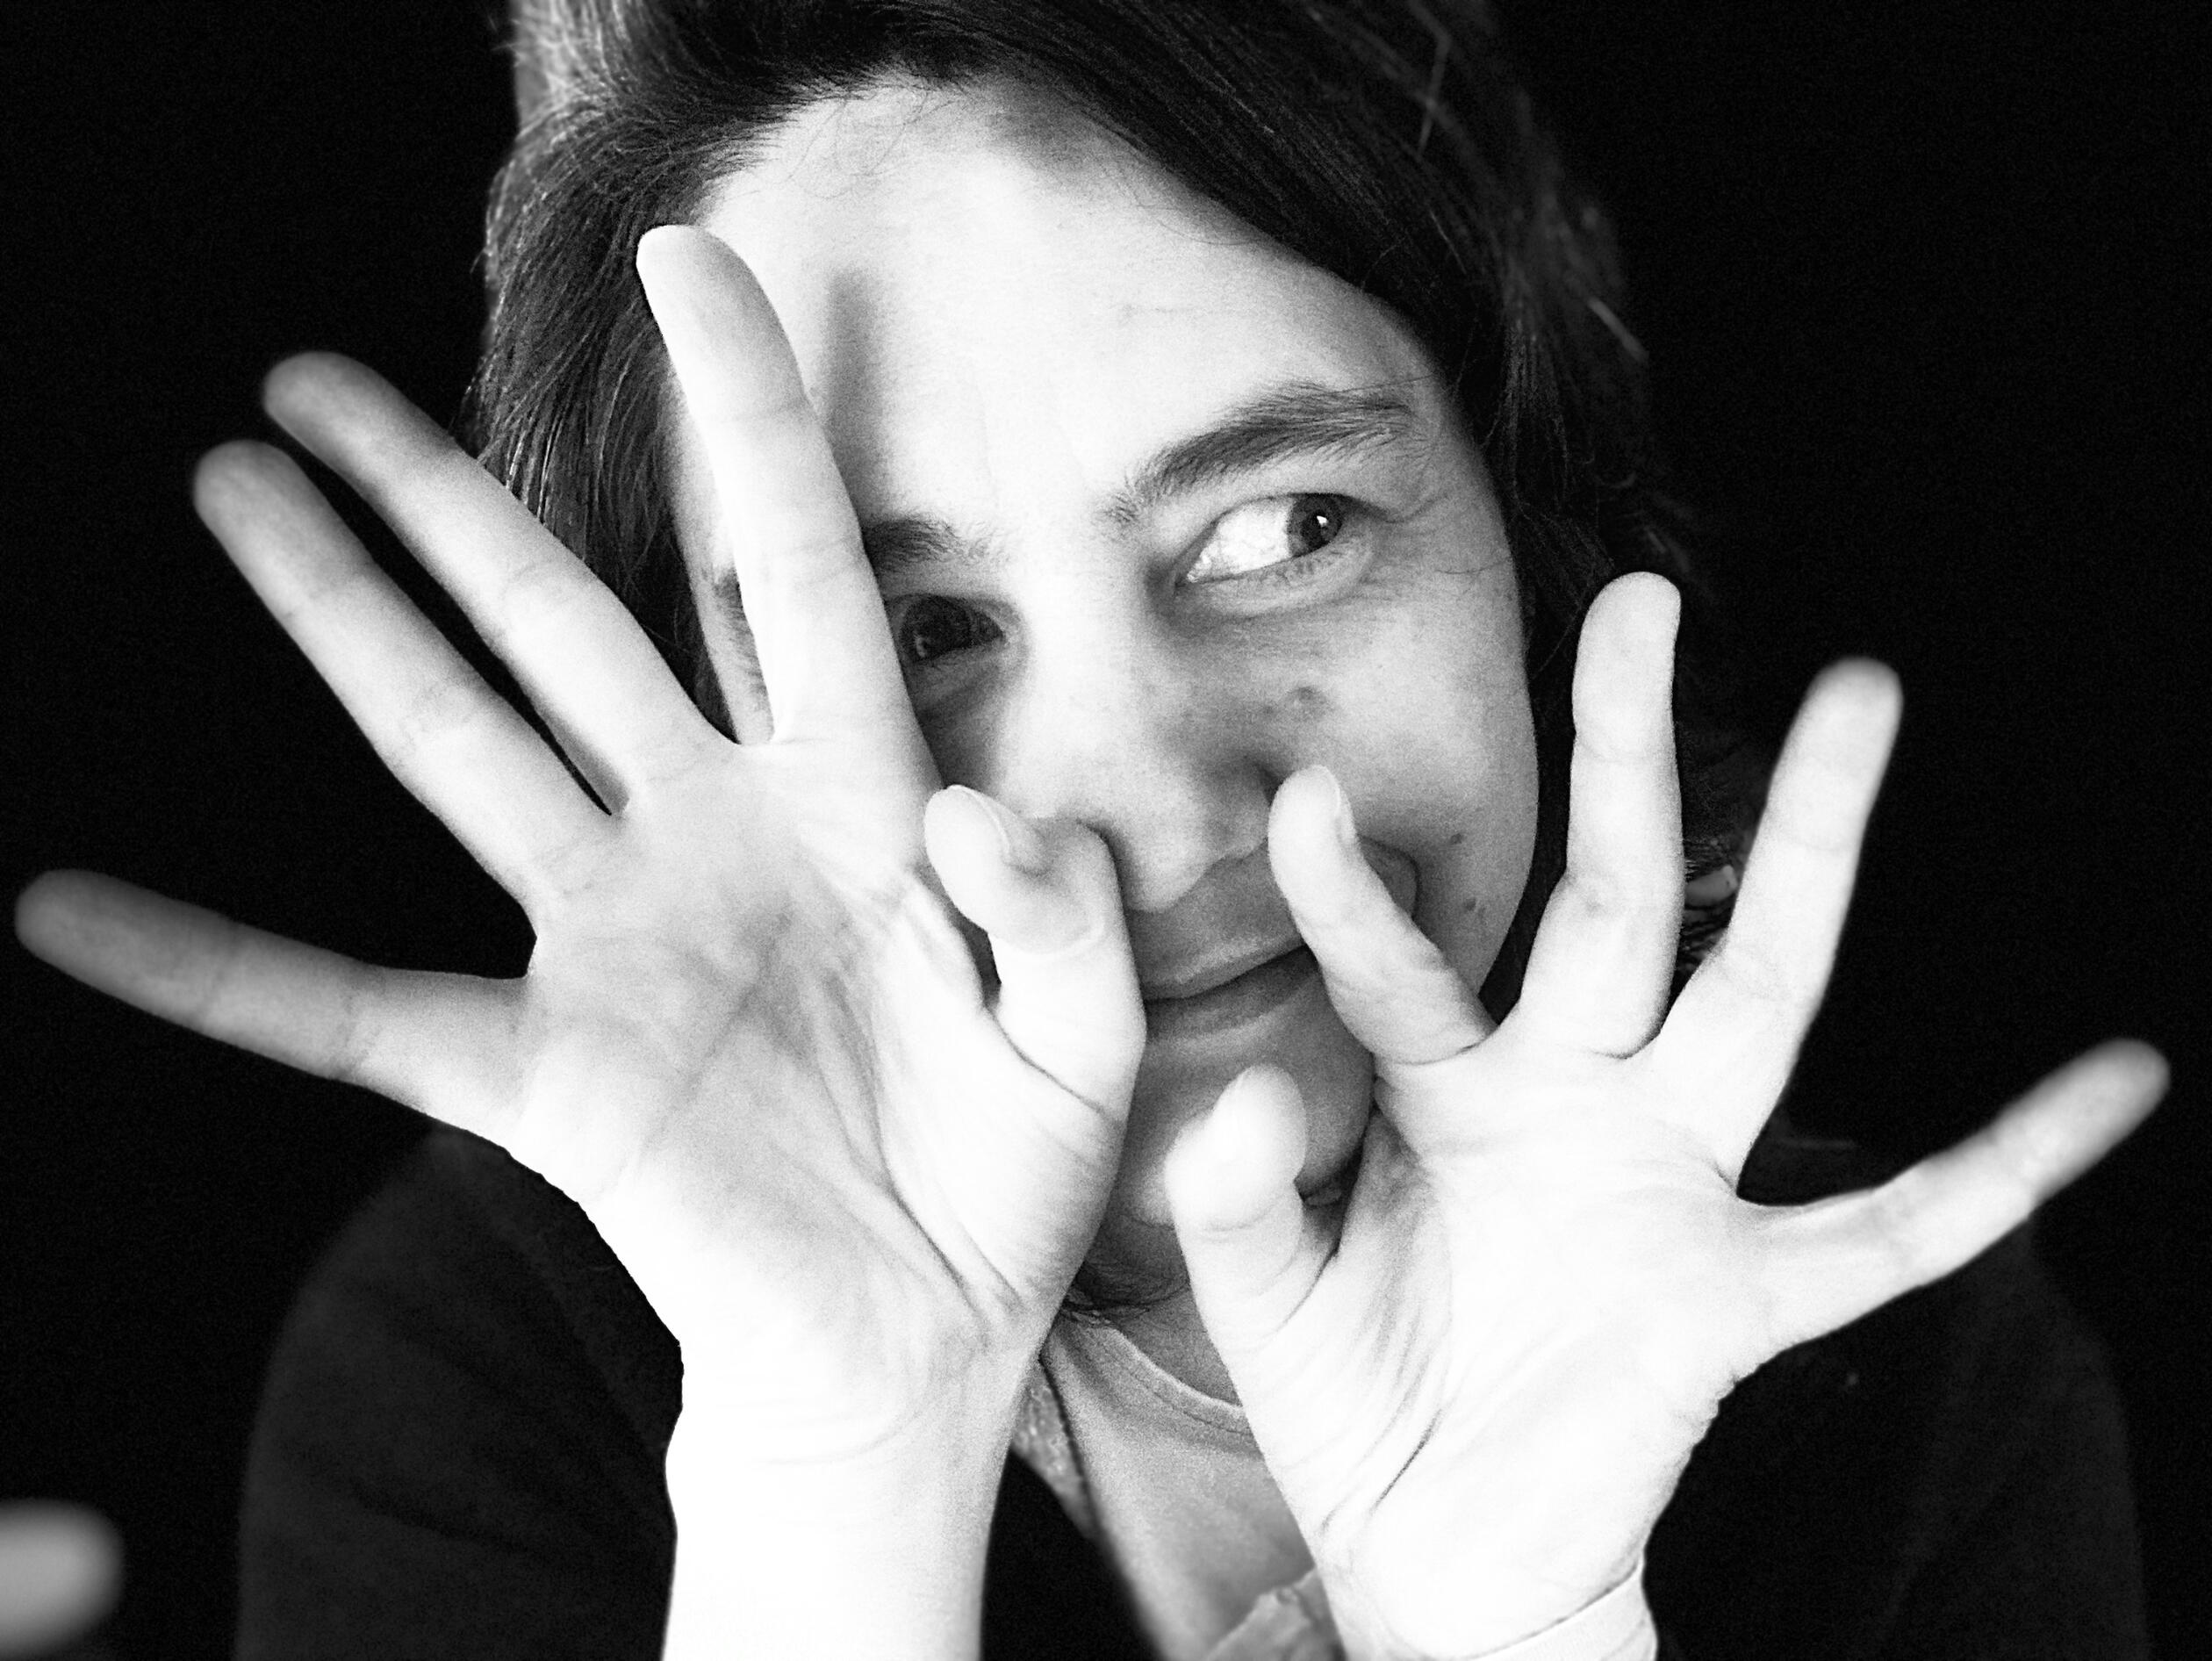 Black and white self-portrait, white woman looking playfully off to the side with hands partly securing the face, palms out and fingers open.